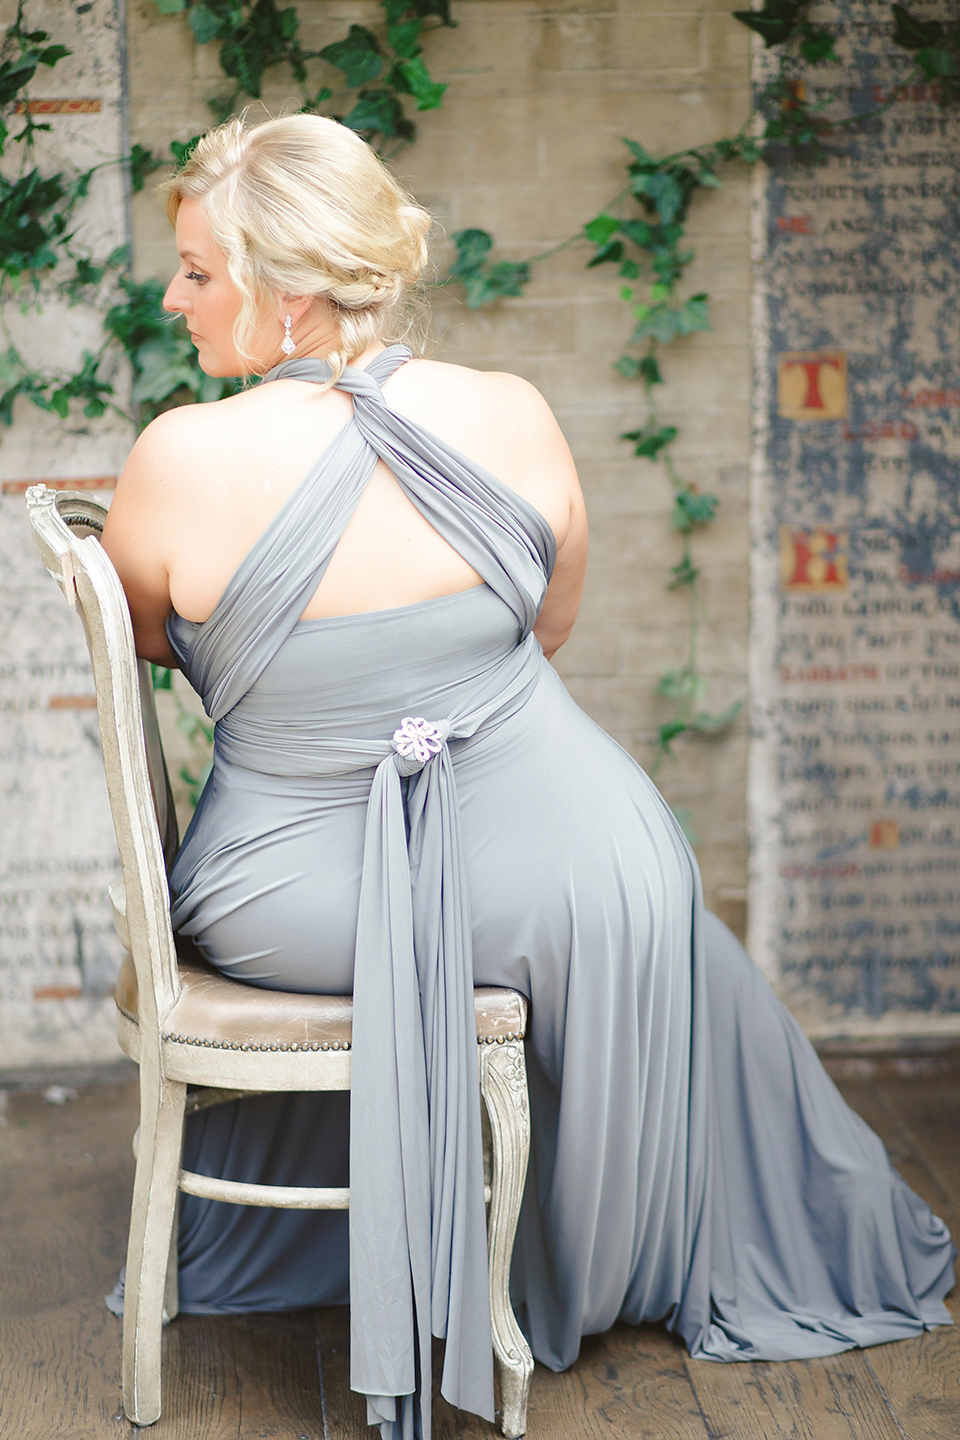 twobirds Bridesmaids - dresses designed to fit, compliment and flatter all body shapes.